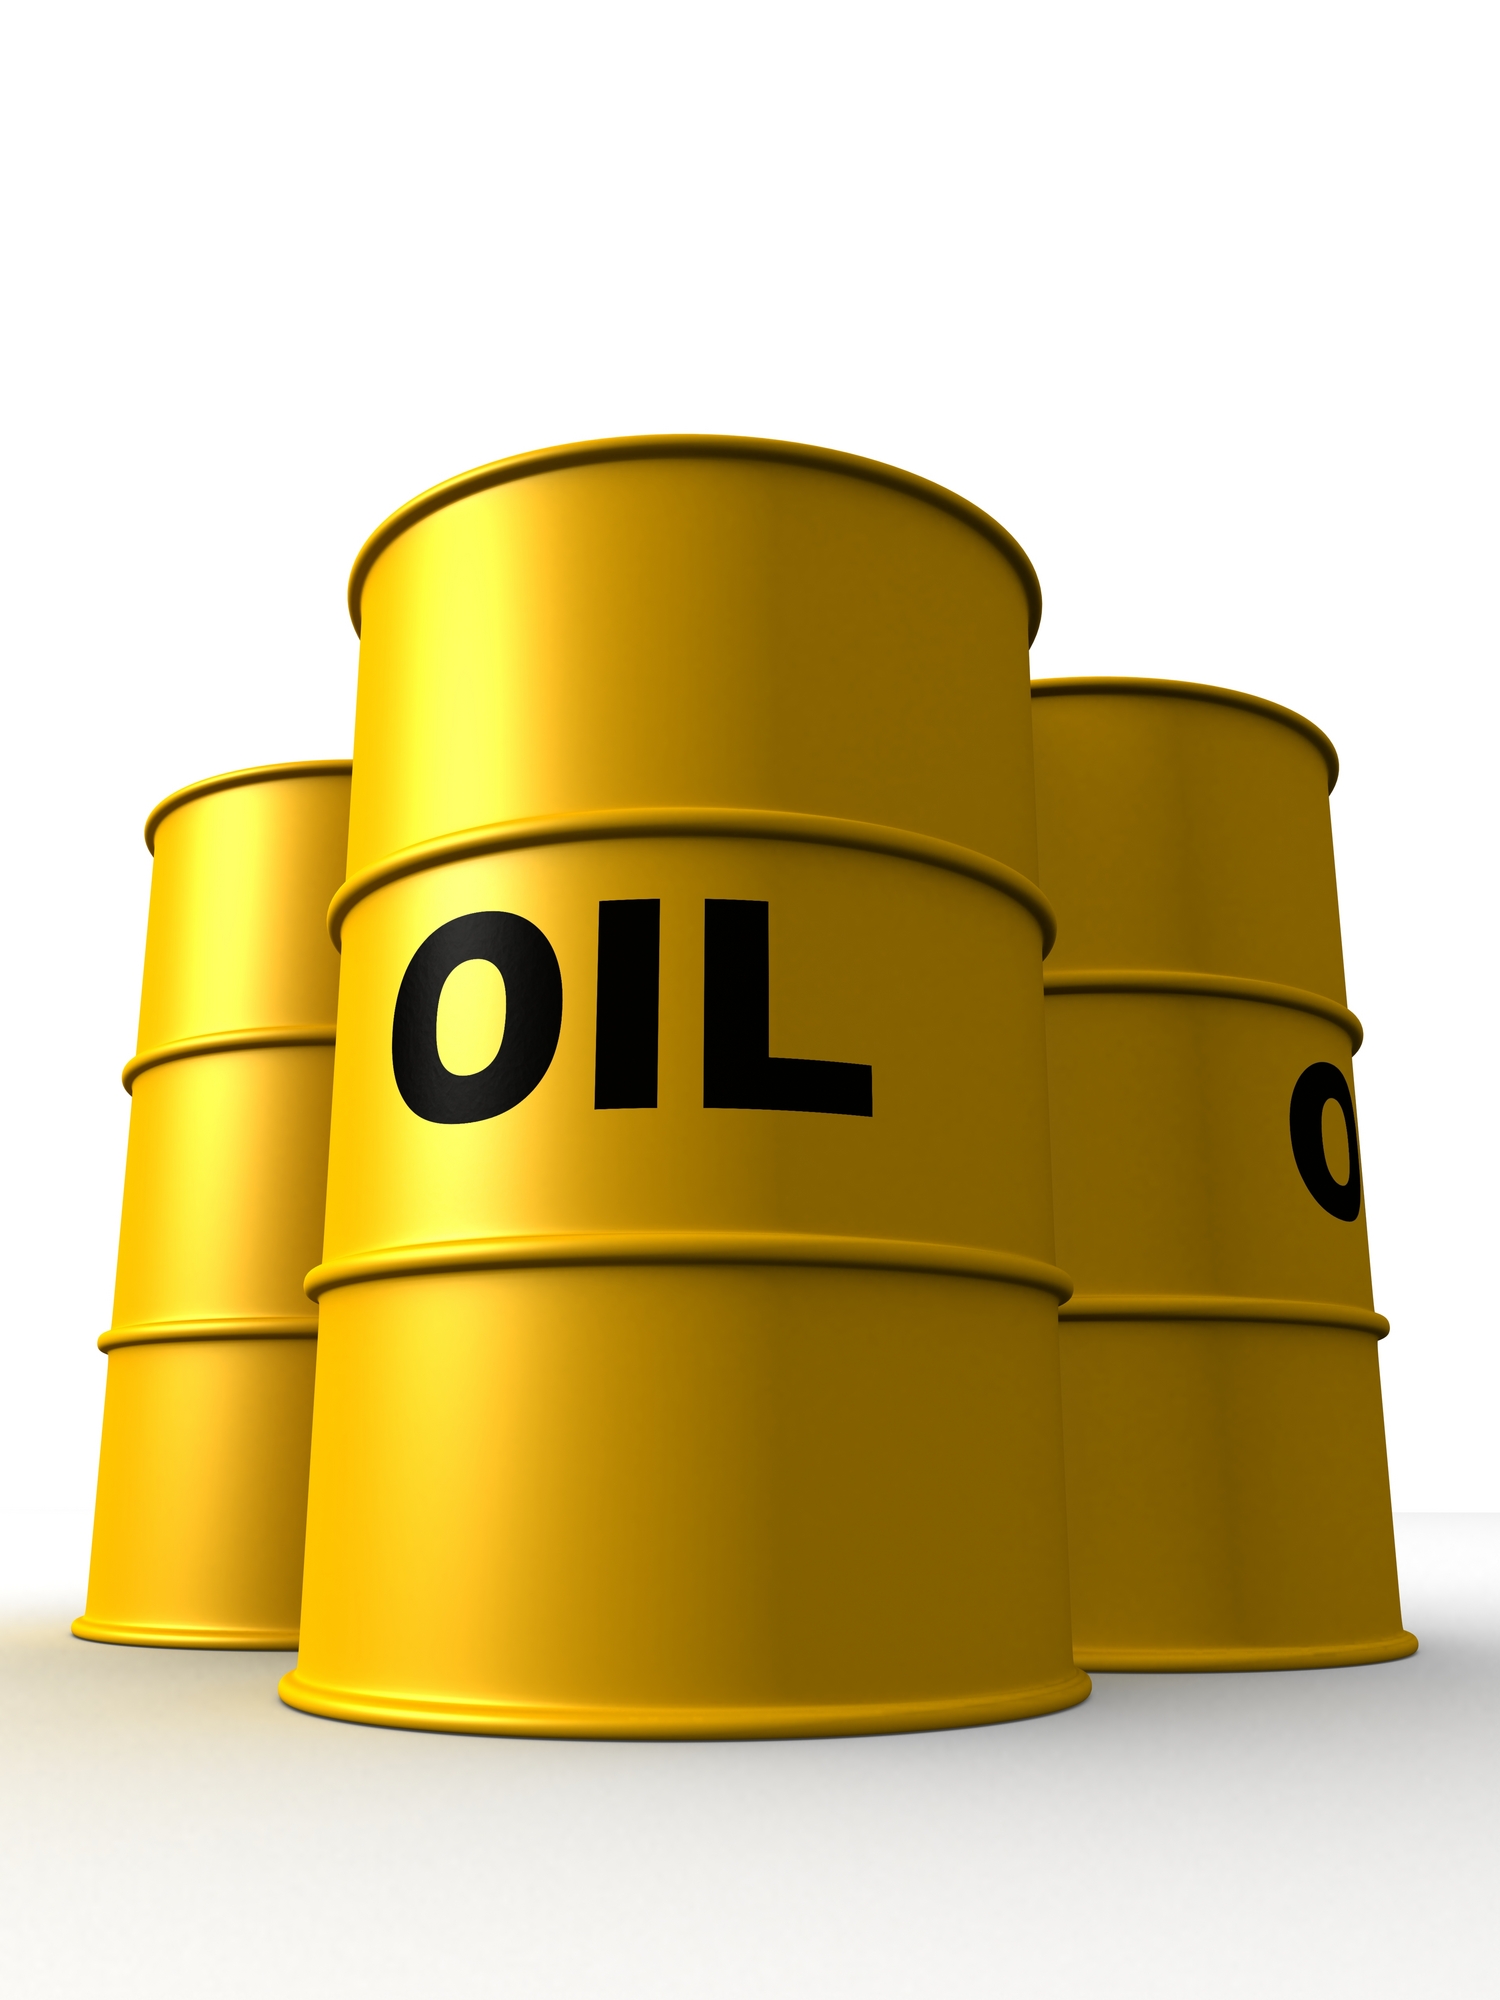 The opportunity to cash in on low oil prices is now! Find out how by calling (800) 830-3029